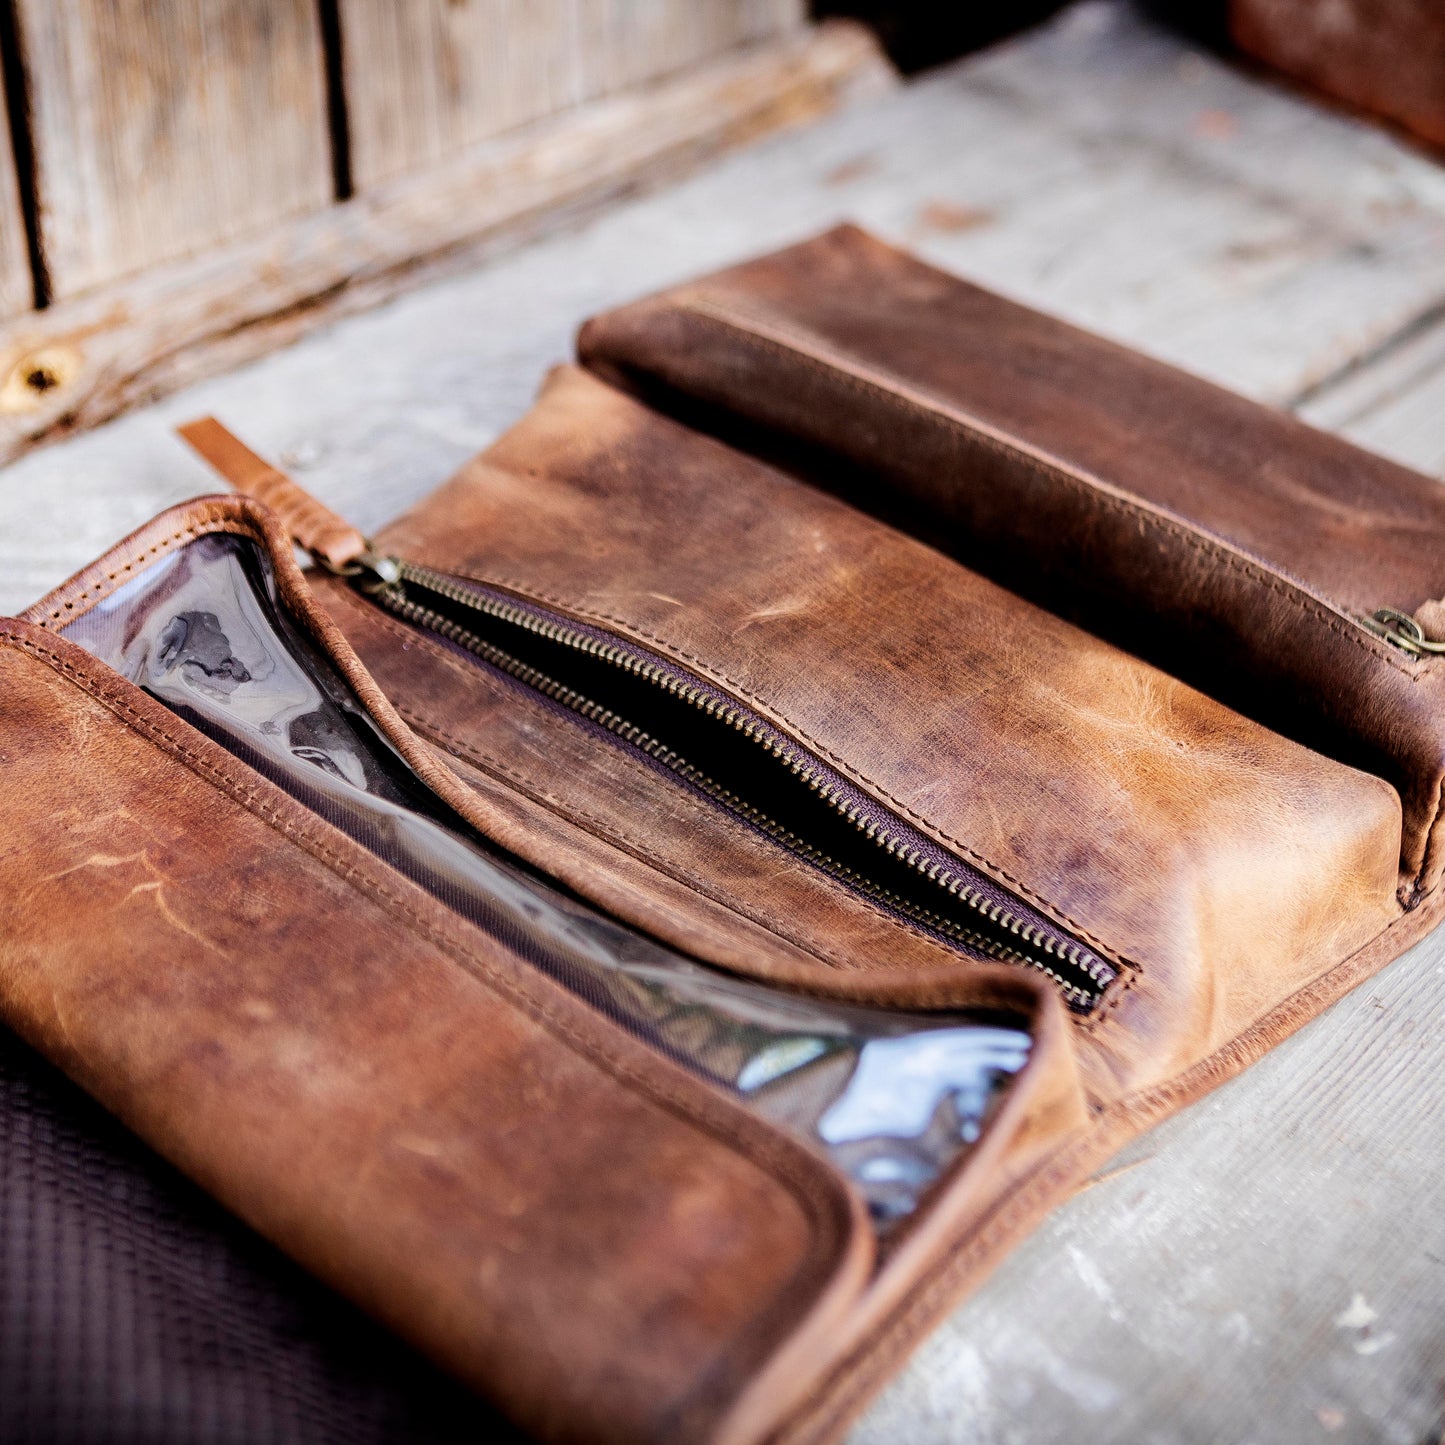 Buffalo Hide Leather Hanging Toiletry Roll